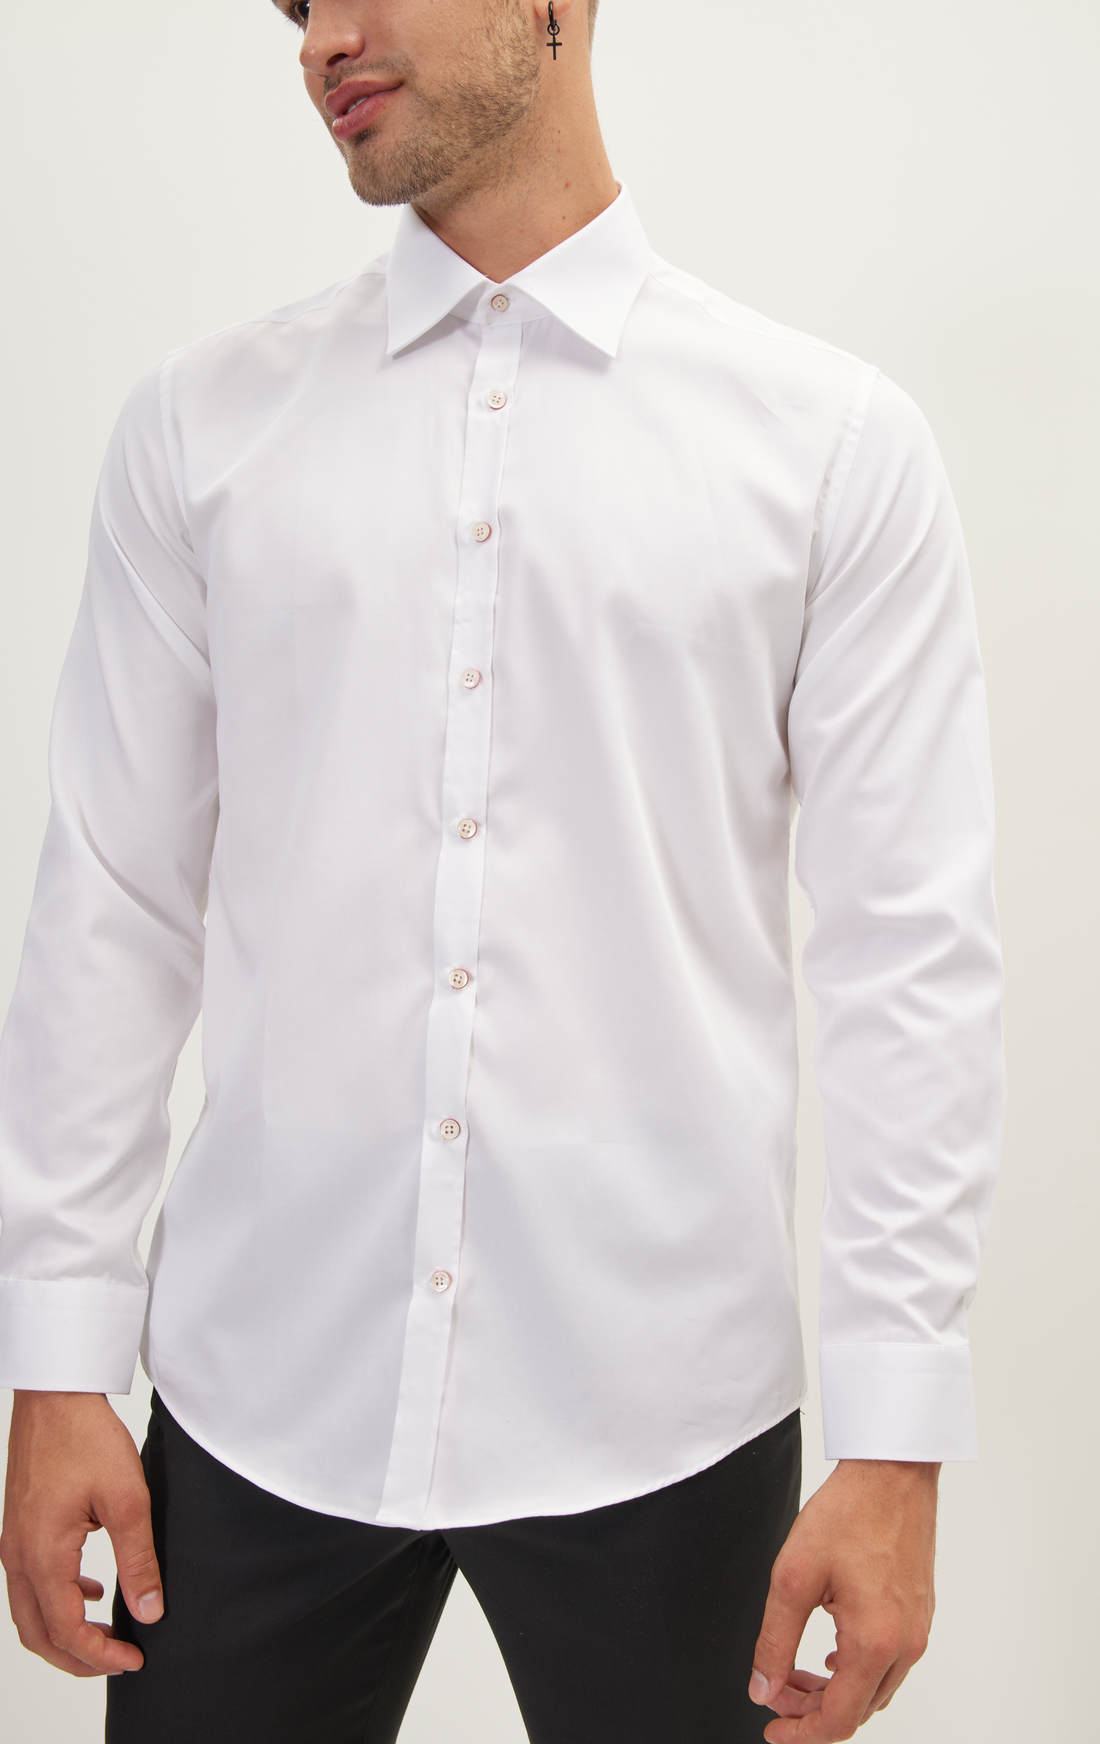 N° 4679 PURE COTTON CONTRAST BUTTON DRESS SHIRT - WHITE RED ACCENTS